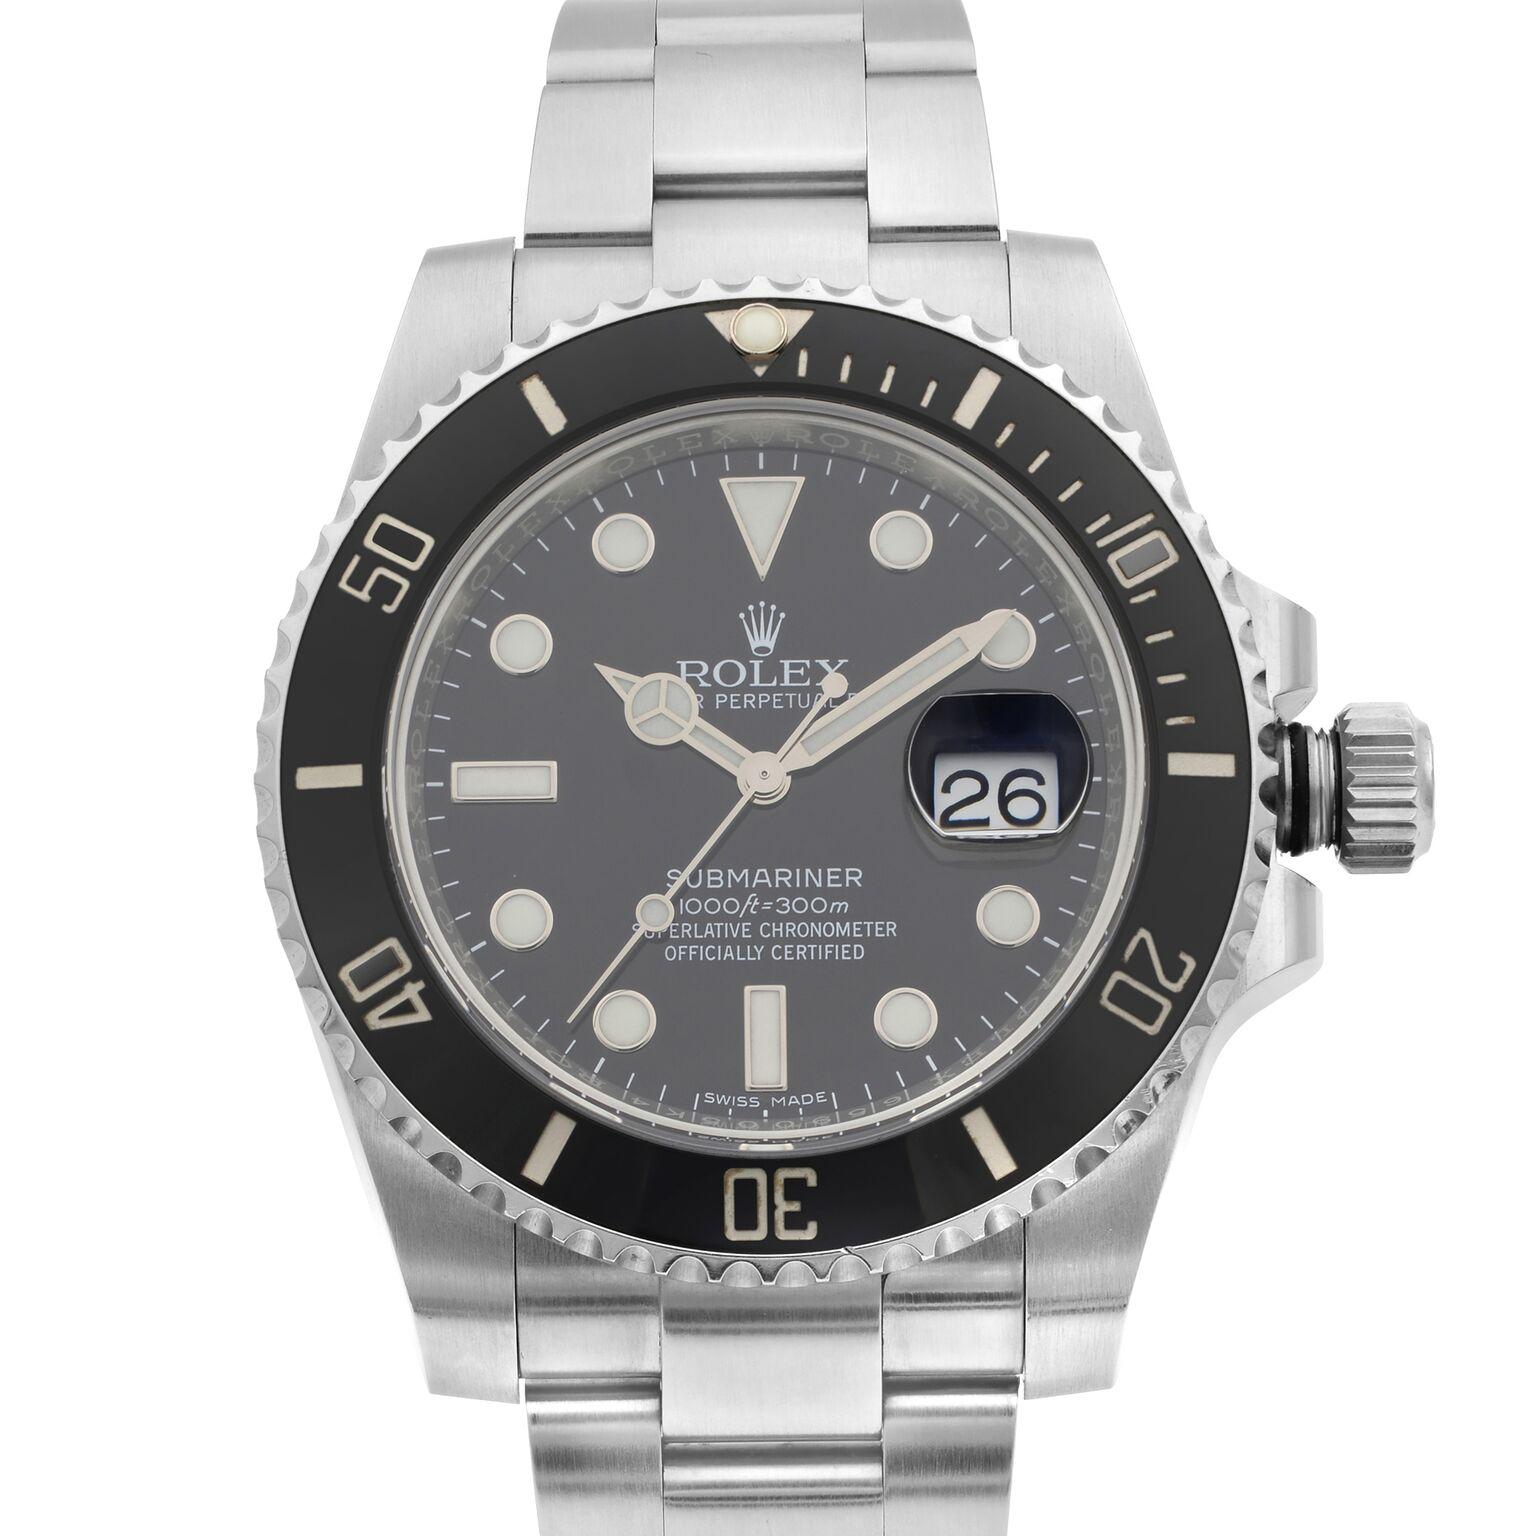 This pre-owned Rolex Submariner 116610LN is a beautiful men's timepiece that is powered by mechanical (automatic) movement which is cased in a stainless steel case. It has a round shape face, date indicator dial and has hand  style markers. It is